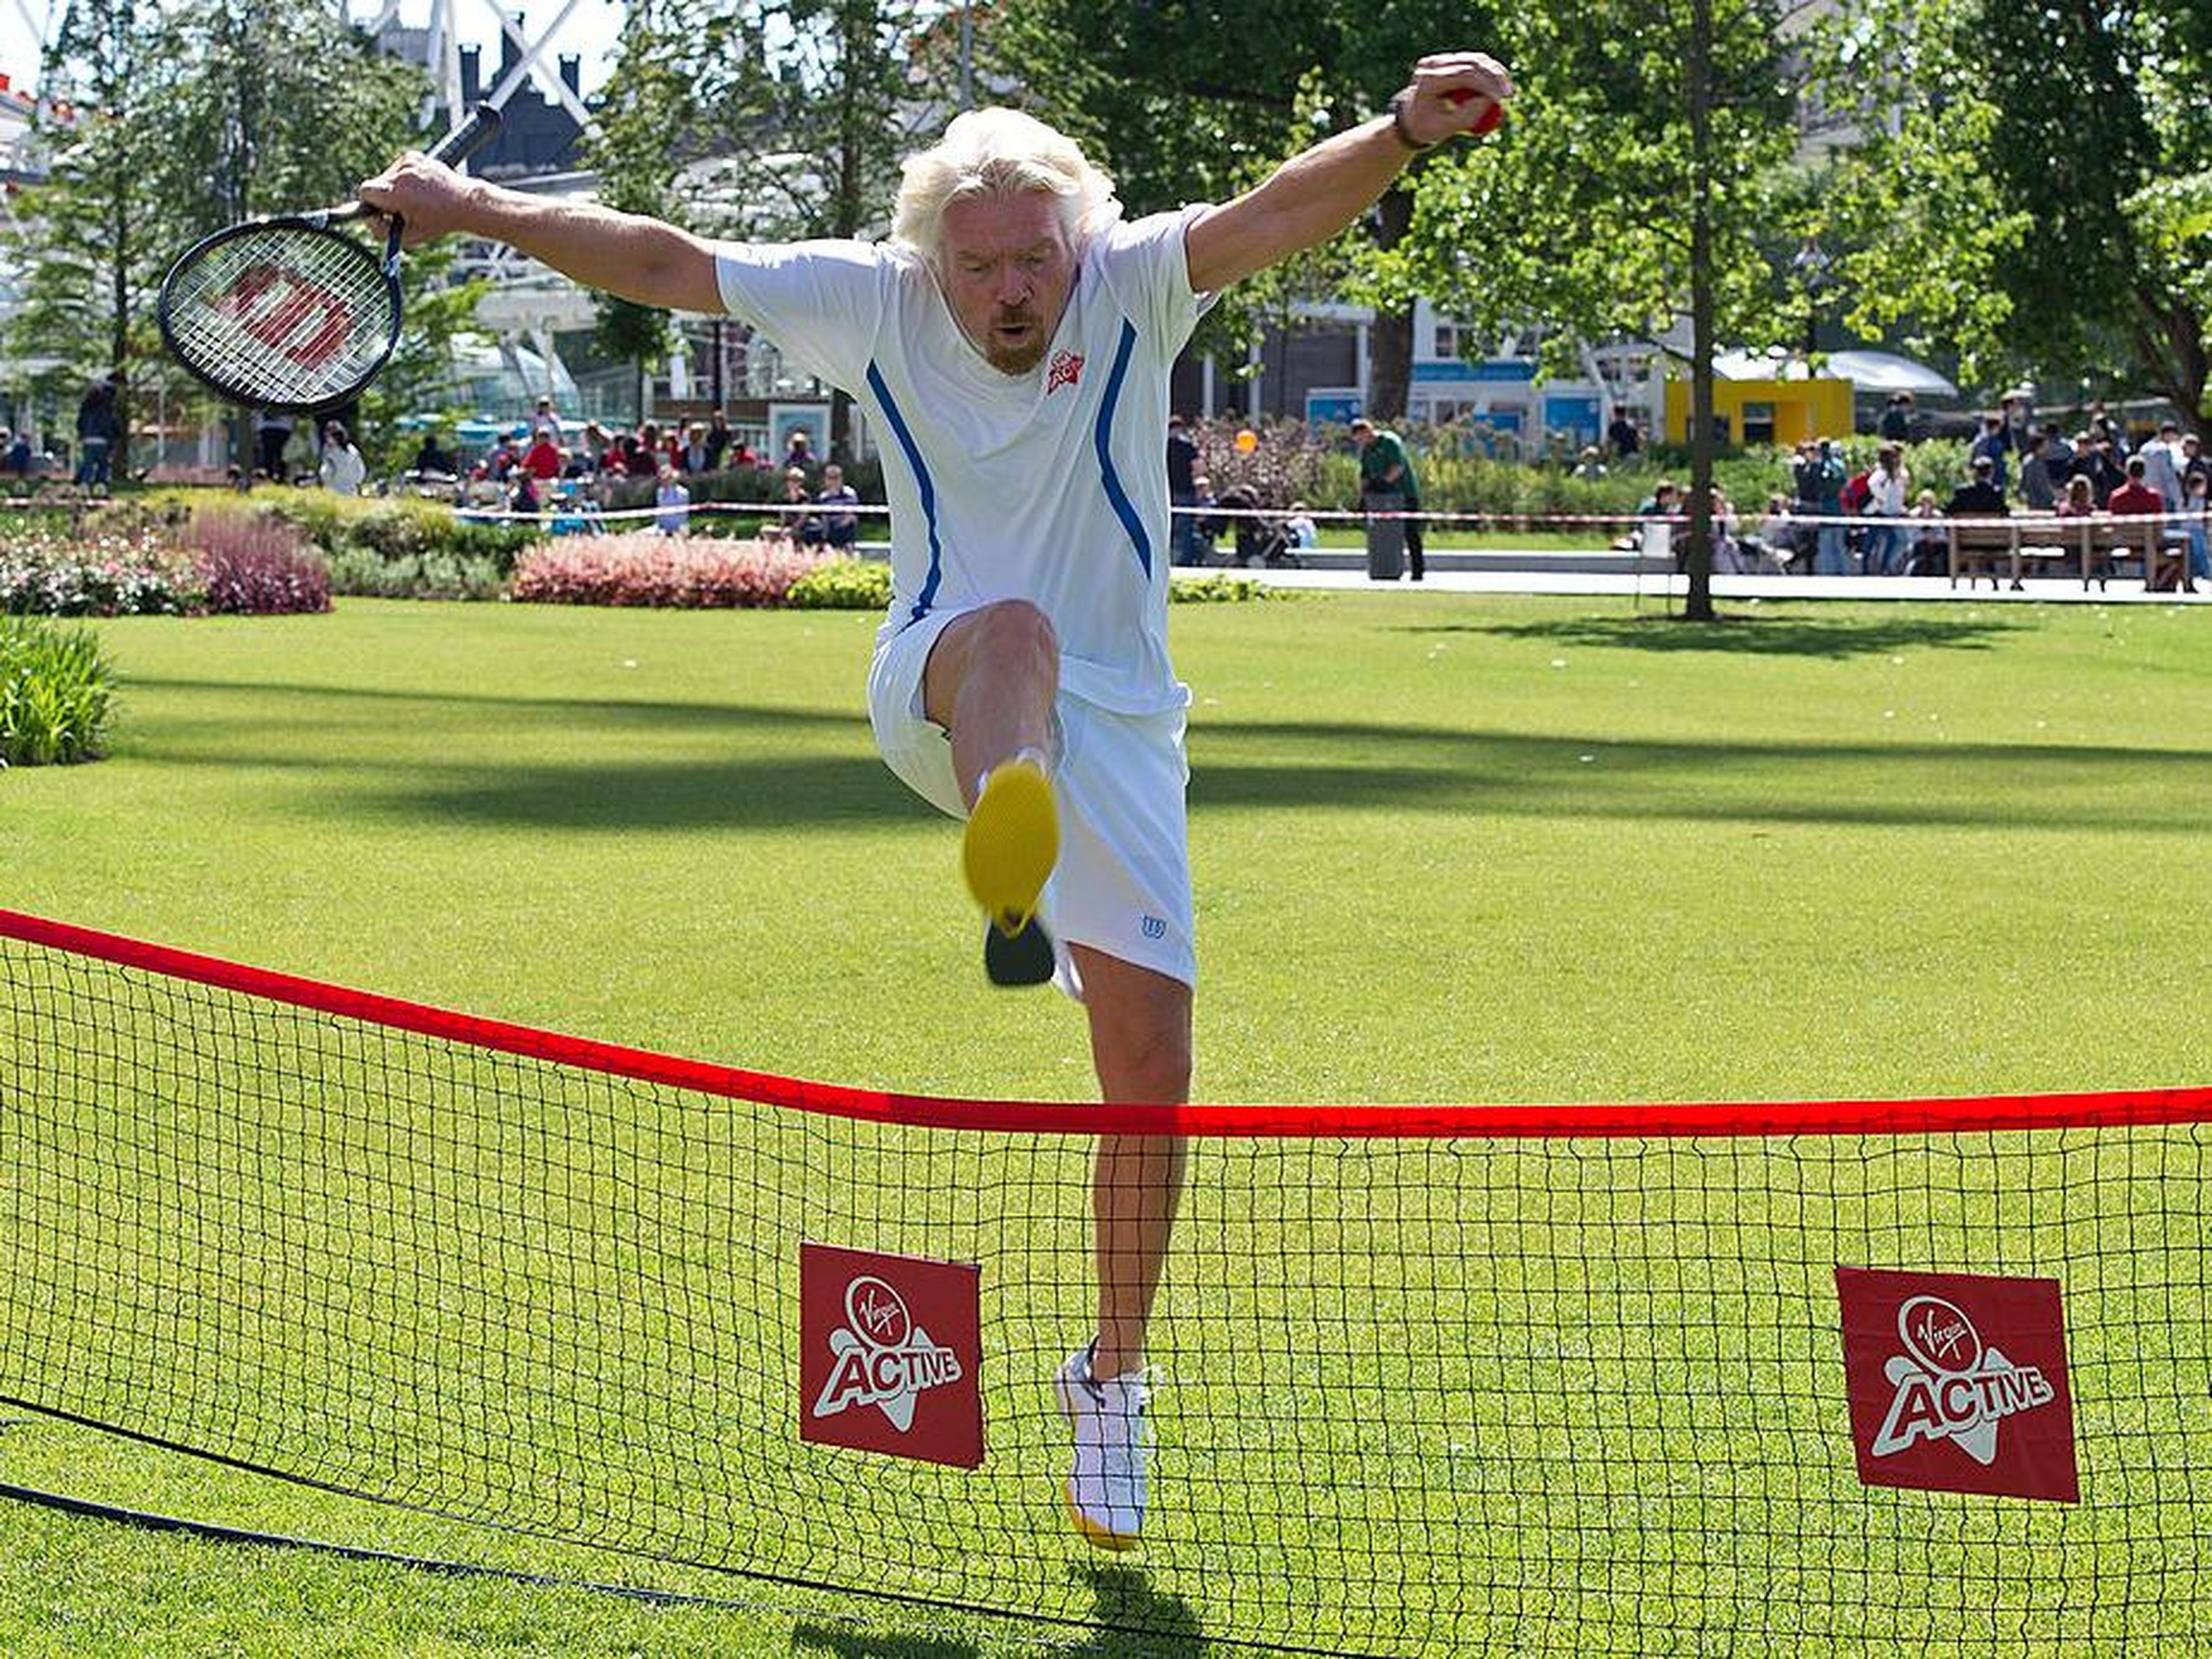 Billionaire Richard Branson also exercises before breakfast and is a fan of playing tennis. He stays active by kite-surfing, swimming, and cycling.